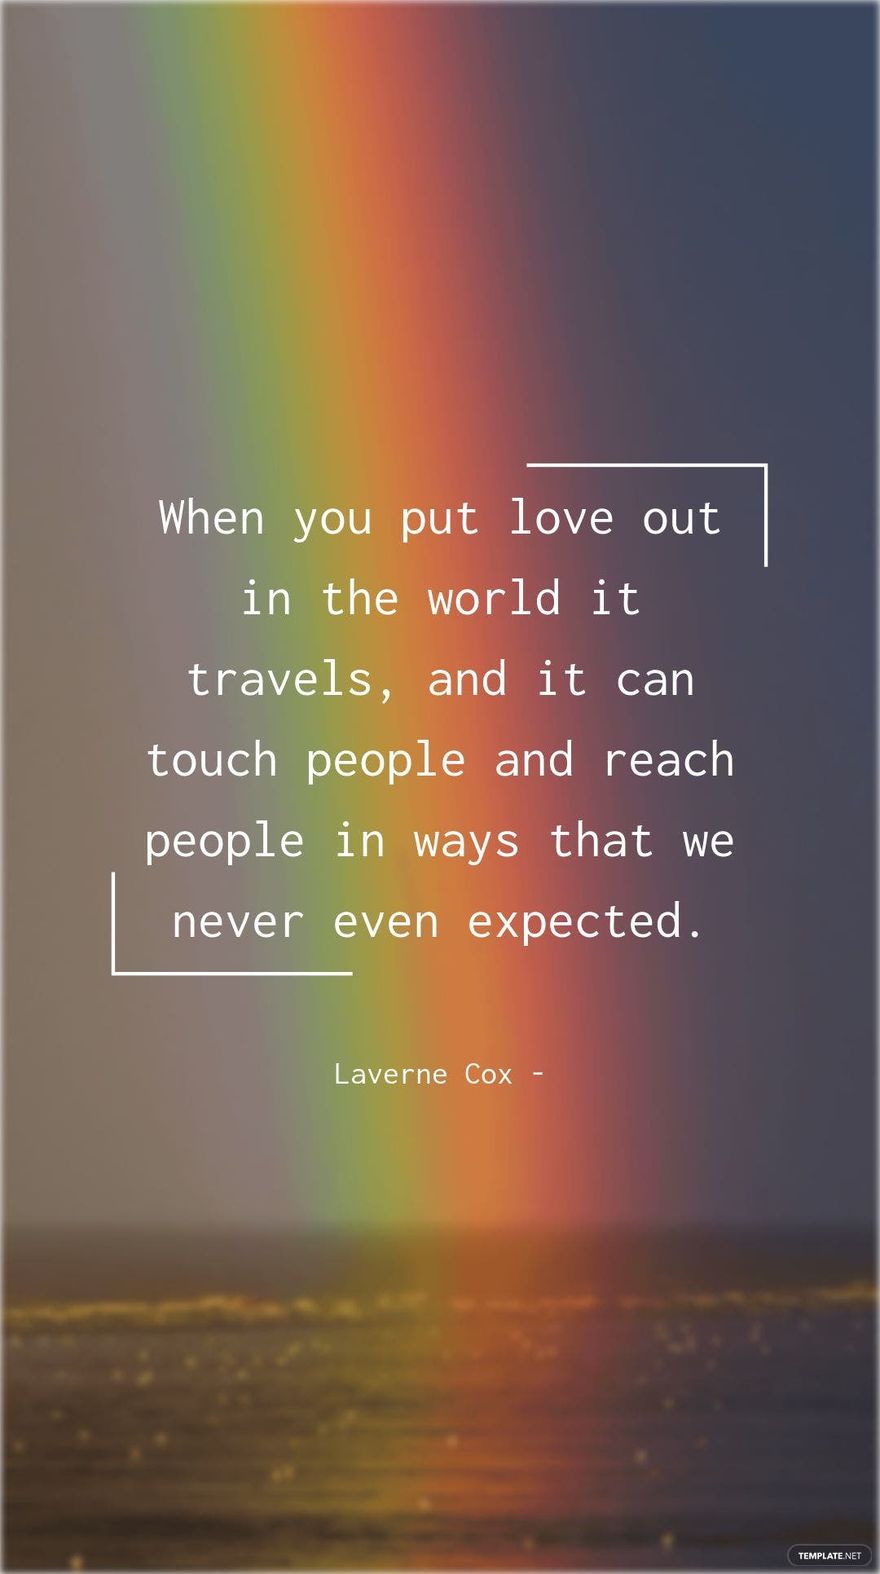 Laverne Cox - When you put love out in the world it travels, and it can touch people and reach people in ways that we never even expected. in JPG